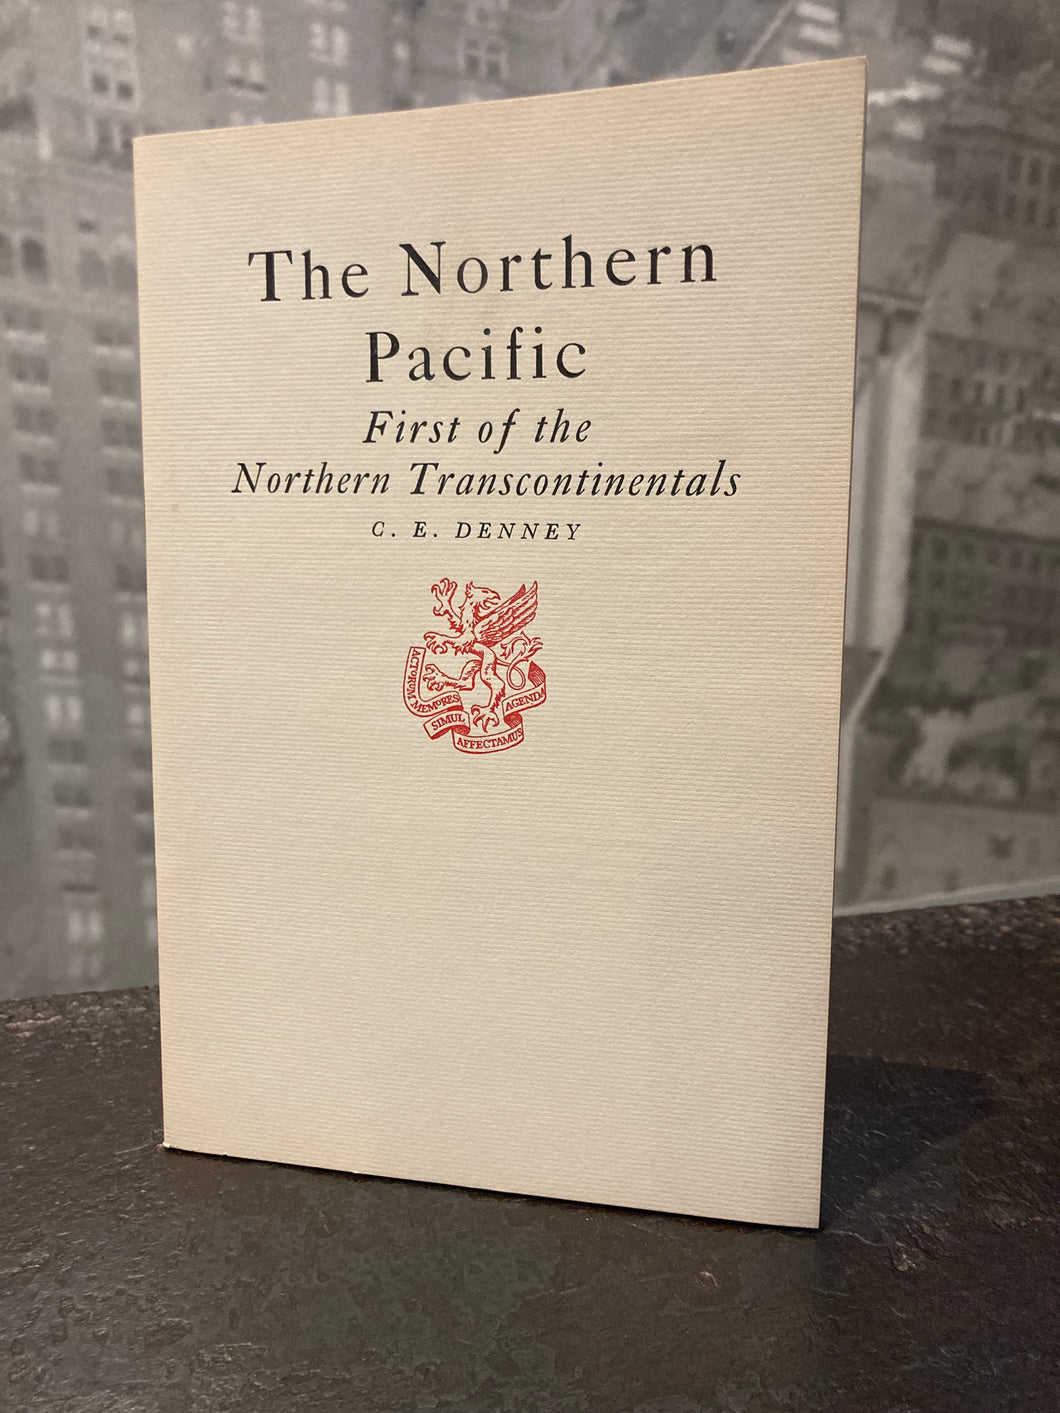 The Northern Pacific: First of the Northern Transcontinentals